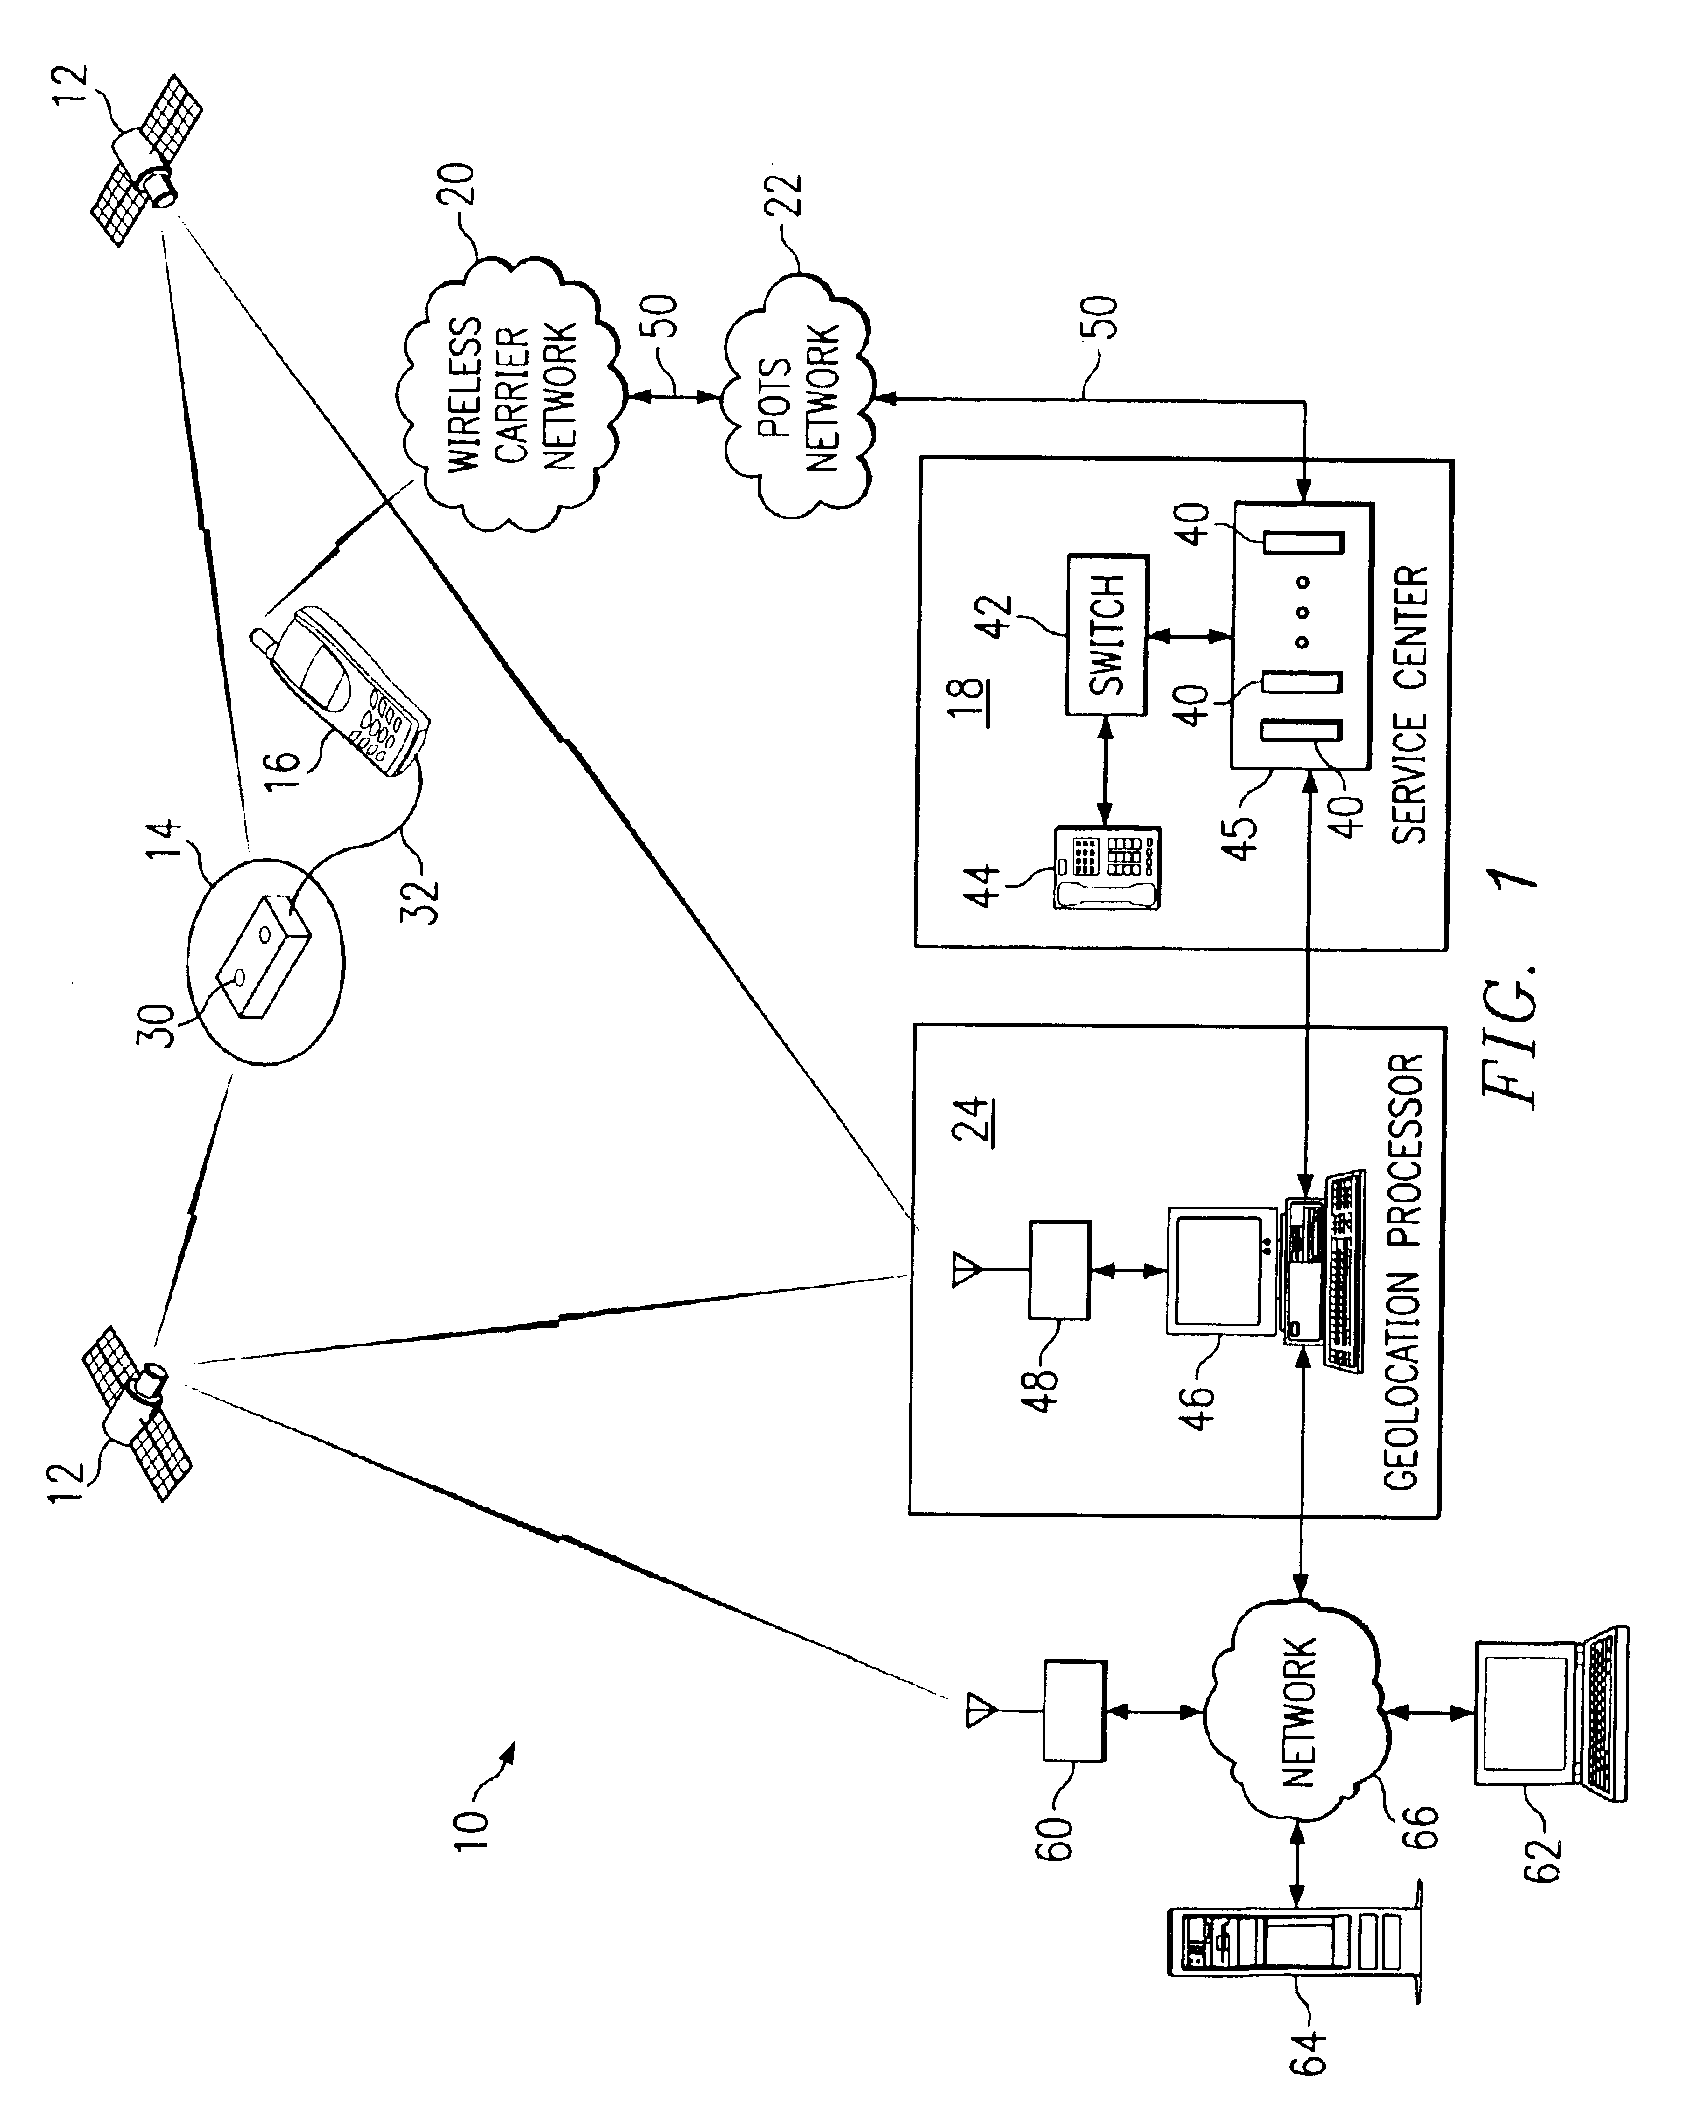 Method and system for processing positioning signals based on predetermined message data segment